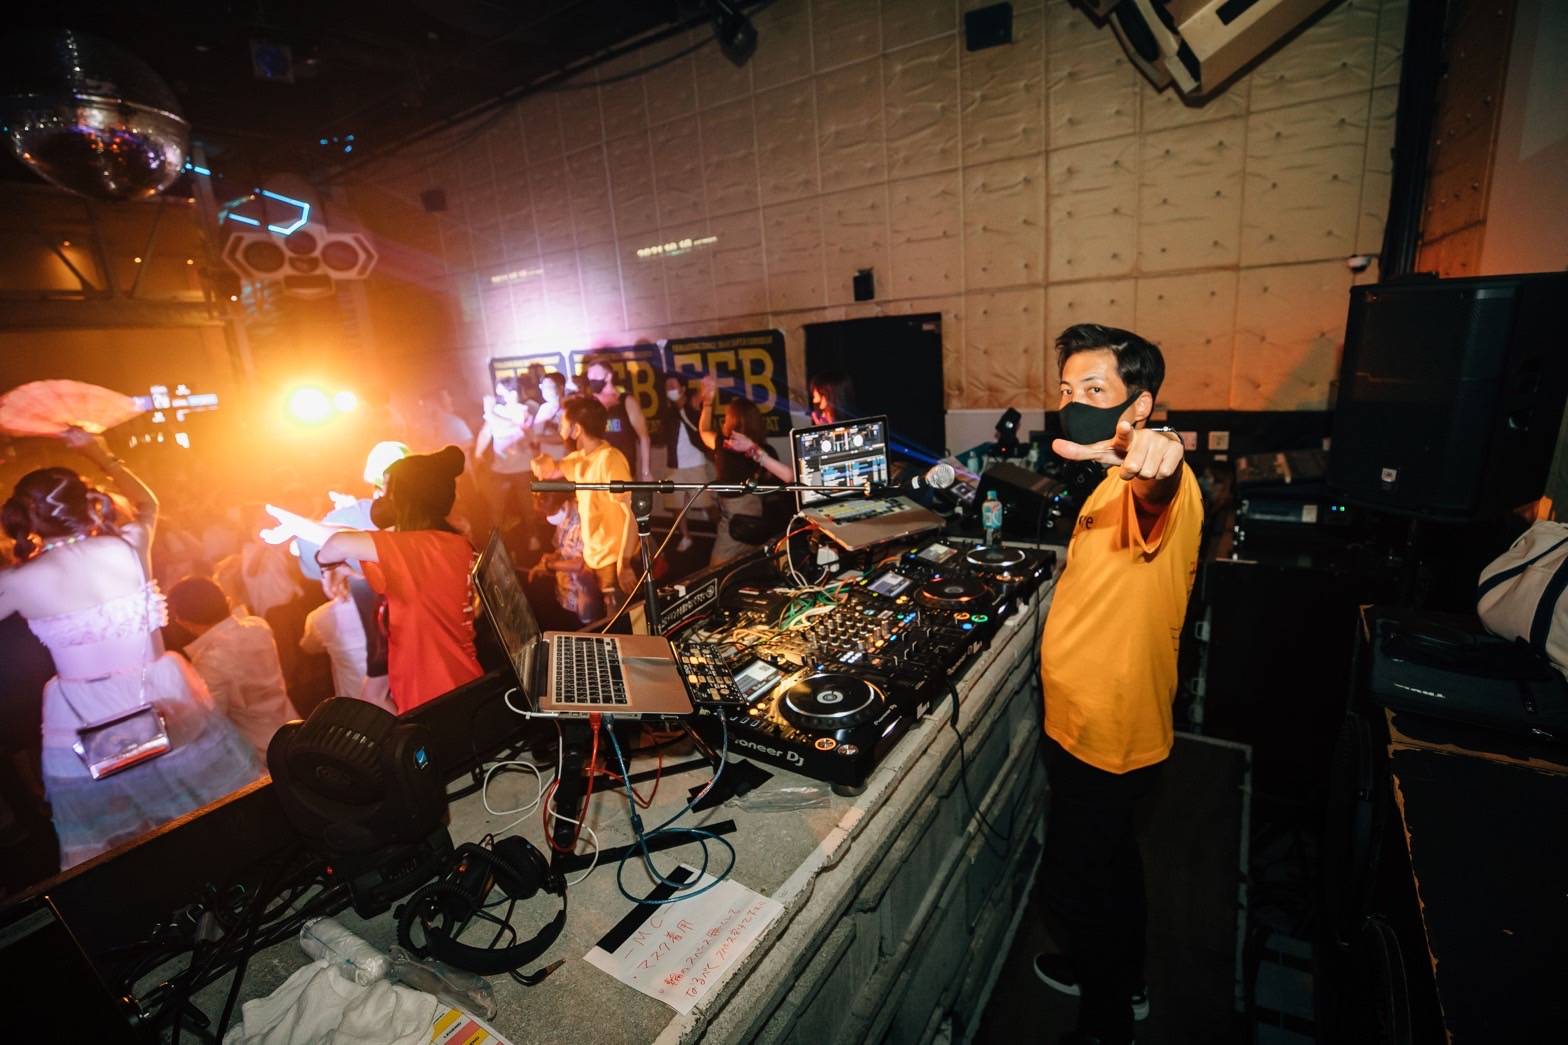 Akira Yokota, better known as DJ Boss, is the man behind the decks at such popular clubs as Maharaja and Velfarre. He has also been a devoted supporter of Eurobeat and a core player in Avex’s “Super Eurobeat” compilation series since 2000. | 